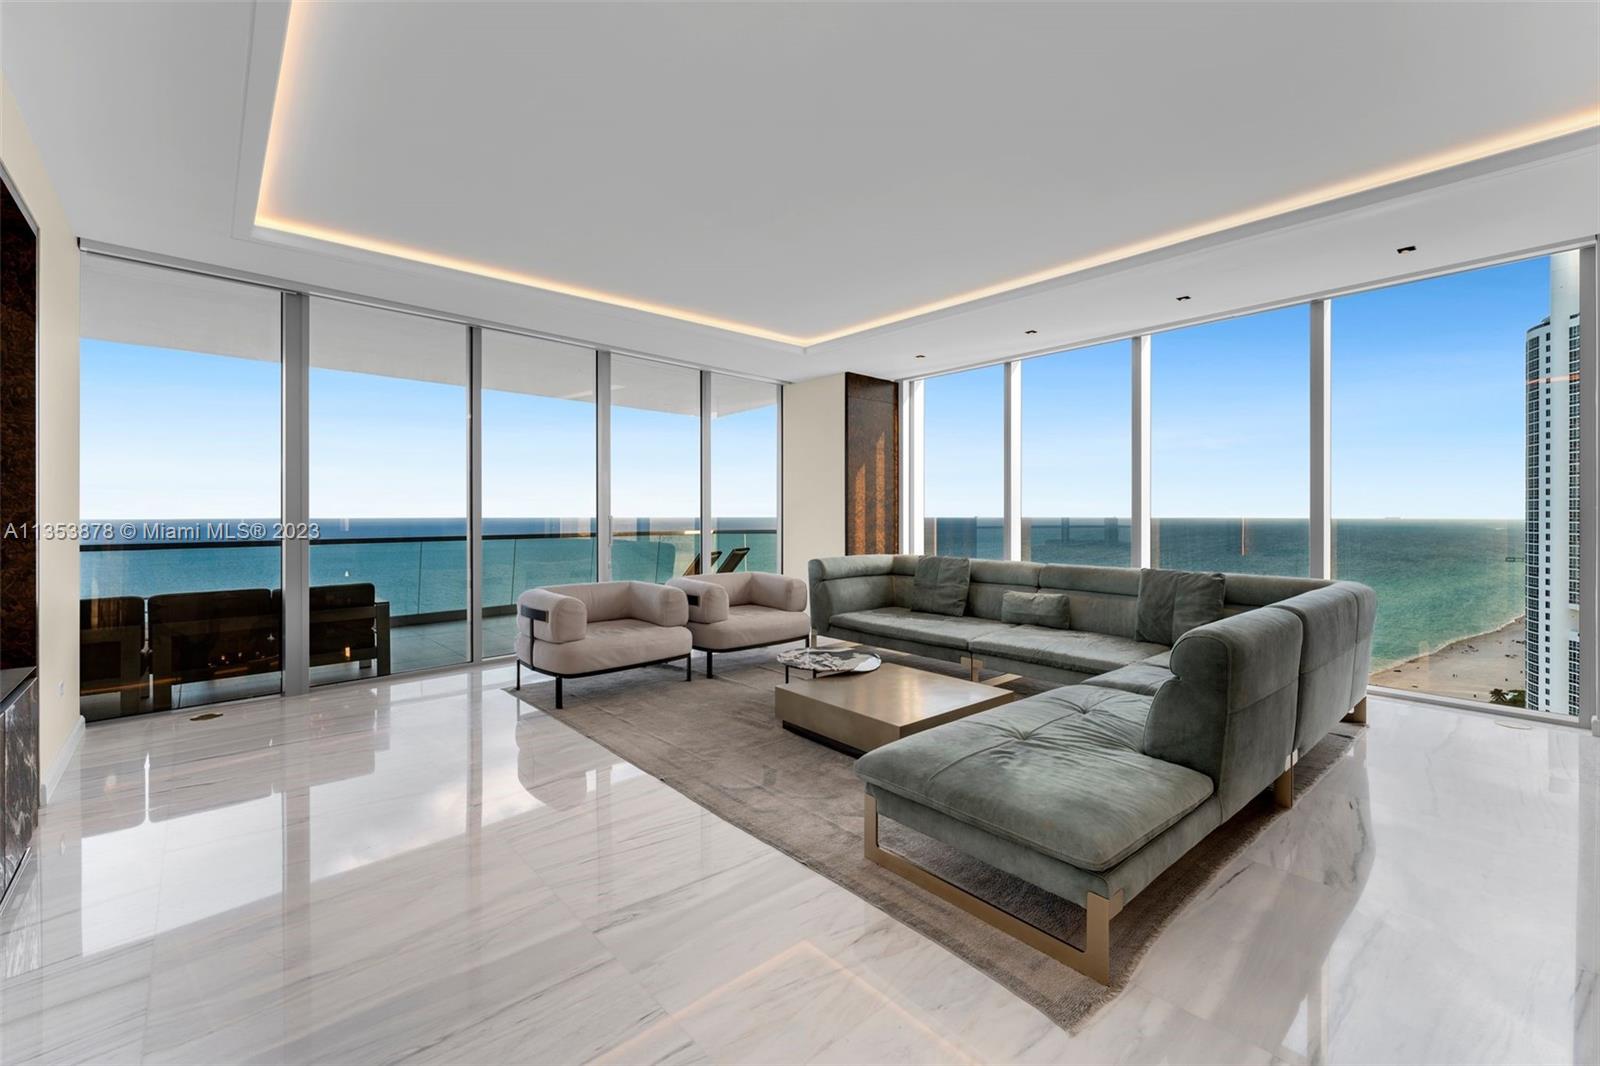 This luxurious, one-of-a-kind 4 bedroom, 4+1 half bathroom home in the sky at the coveted Turnberry Ocean Club offers SE exposure providing stunning, unobstructed 180-degree views of the ocean & bay. Features include Italian custom design with Carrara marble floors, Stradivarius hardwood in bedrooms, smart home tech, atmospheric lighting, custom millwork and a large oceanfront terrace with summer kitchen. The unit is furnished with high-end brand names Ruggiano, Baxter, & Vissionaire. Gourmet kitchen with Italian cabinetry, stone counter & Gaggenau appliances. Turnberry Ocean Club offers 70,000 sq ft of luxury amenities including 3-story private signature Sky Club with sunrise/sunset pools, private dining, health & wellness spa, & beach service. Enjoy the ultimate luxury living experience.